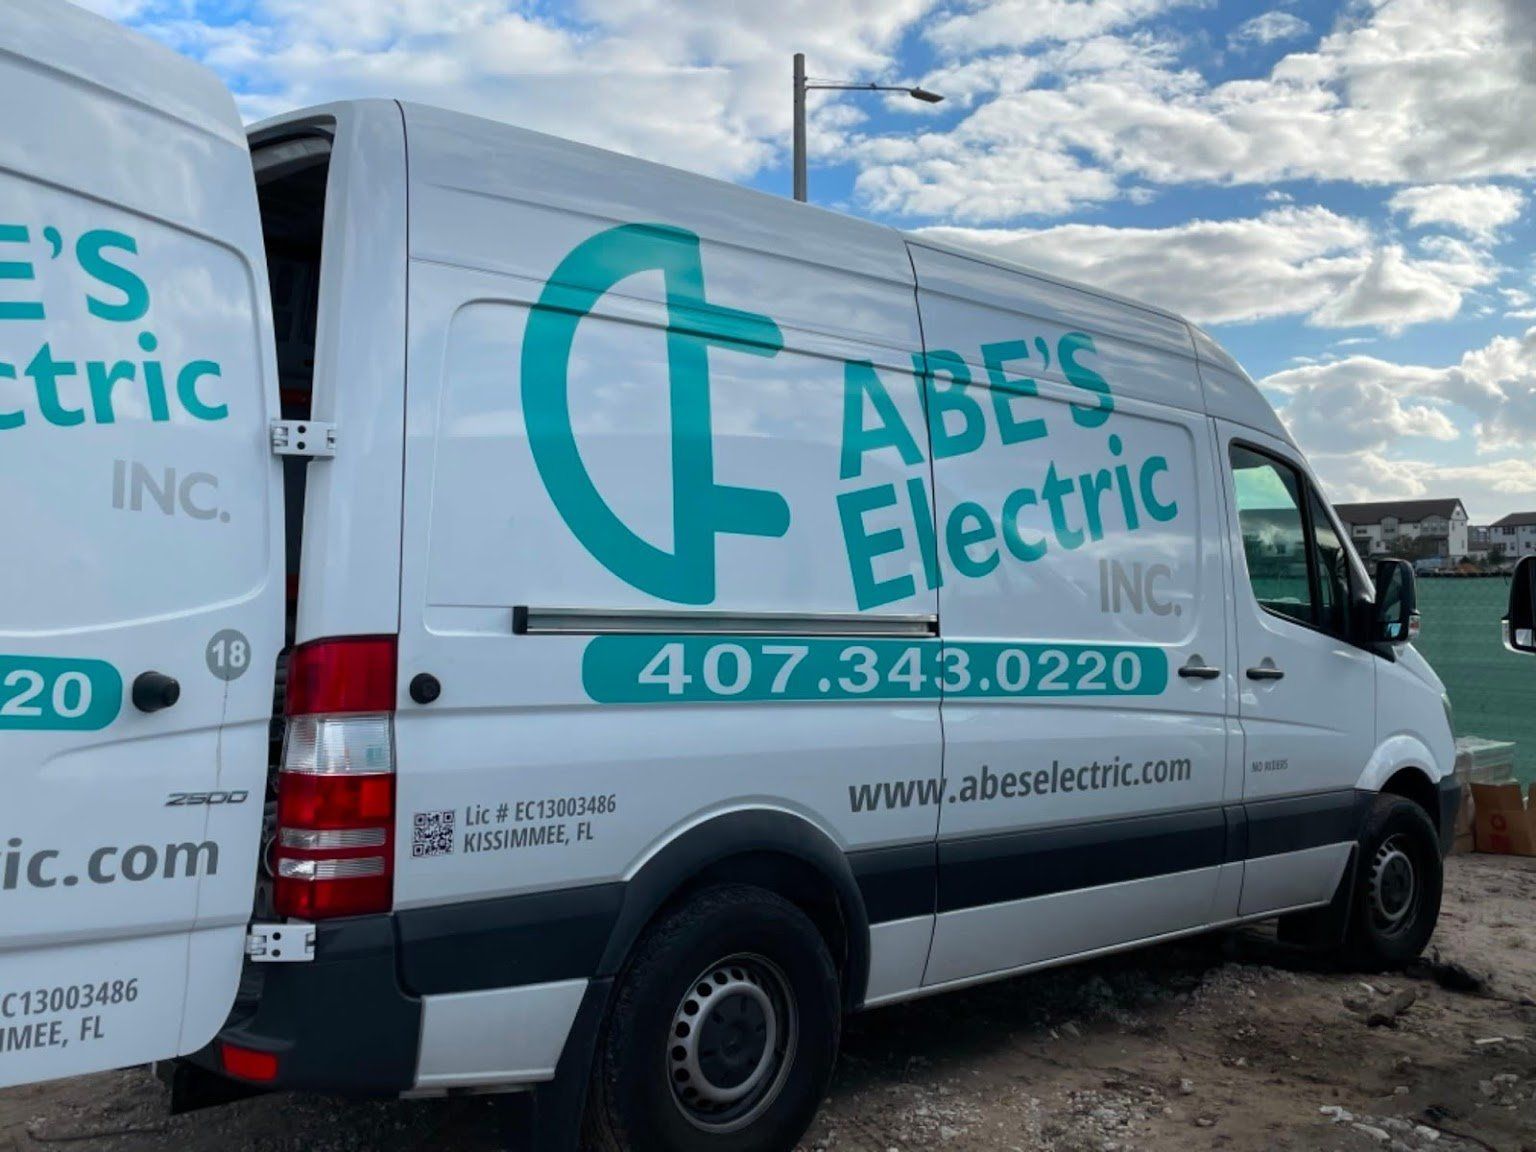 ABE'S Electric